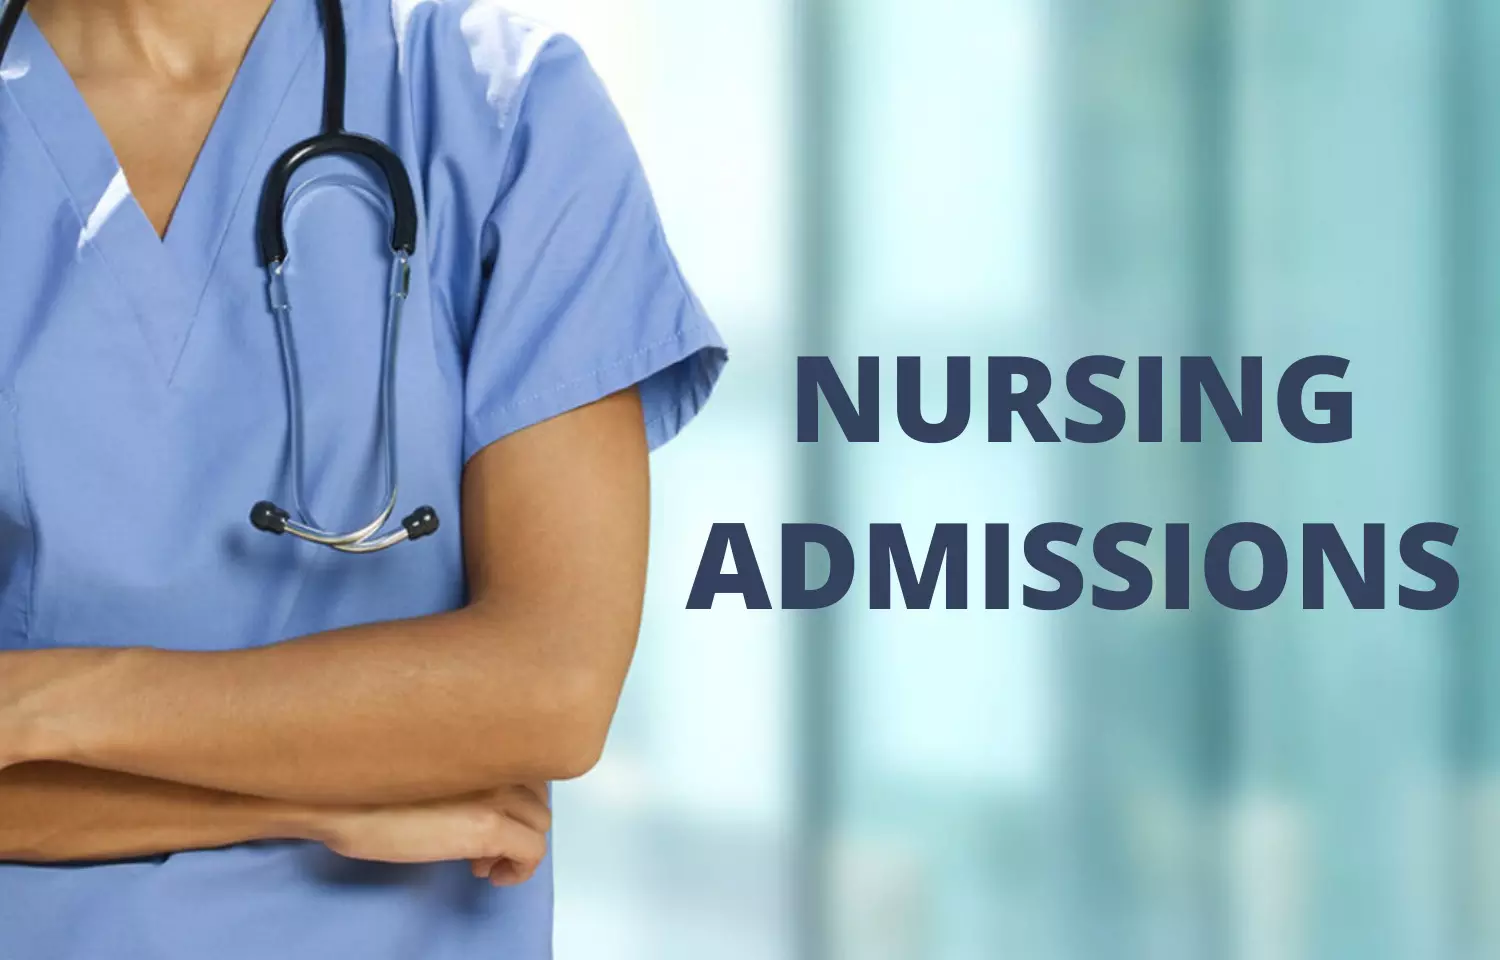 BSc Nursing admissions 2021: BFUHS released Round 2 counselling schedule, Details